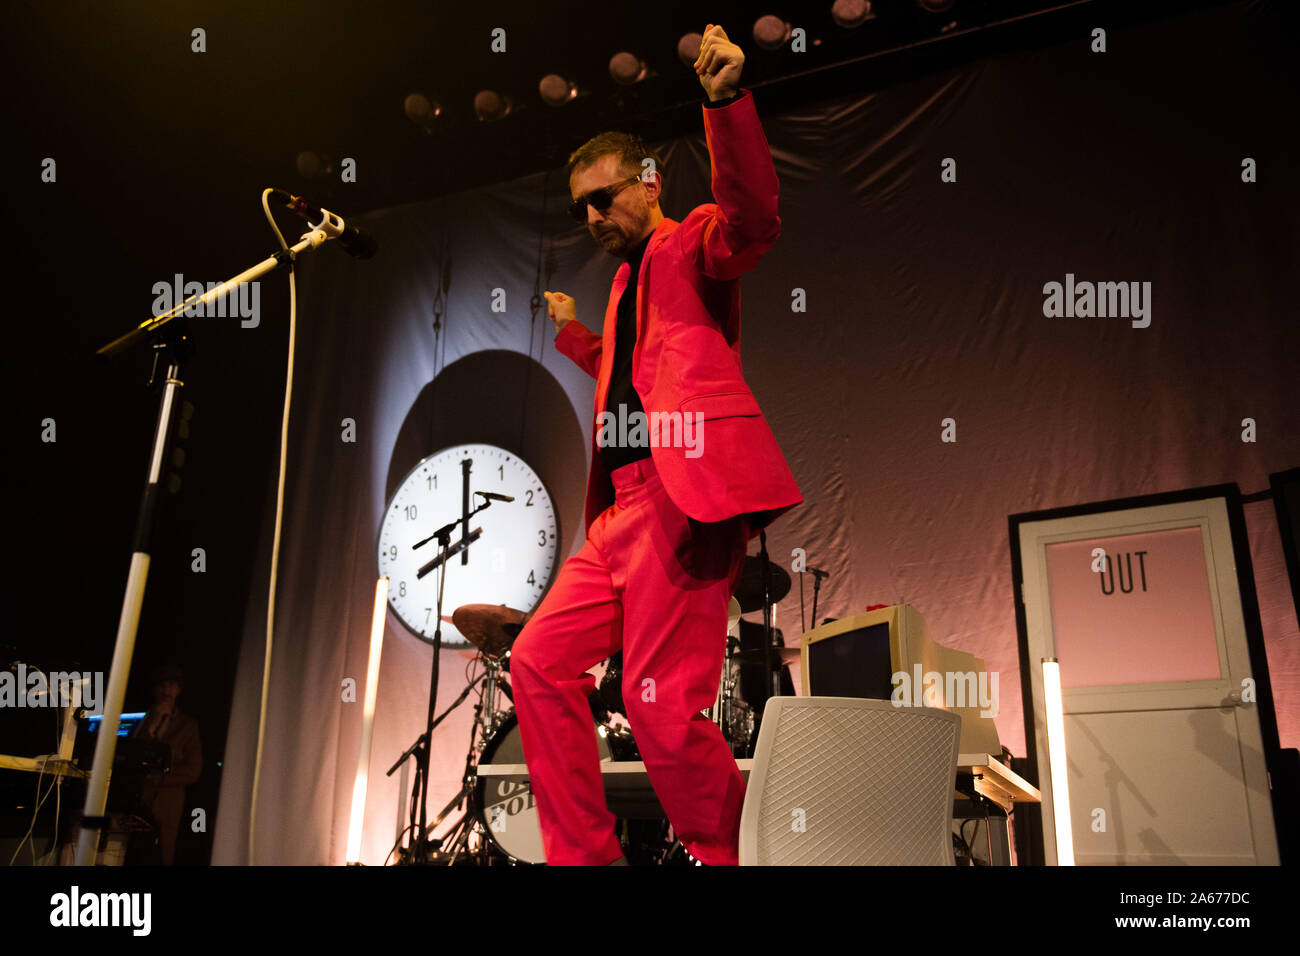 Glasgow, UK. 10 October 2019.  Pictured: Neil Hannon - Singer; Songwriter and Frontman of The Divine Comedy. The Divine Comedy in Concert at The Old Fruitmarket in Glasgow. They are performing their new studio album 'Office Politics'.  Credit: Colin Fisher/Alamy Live News Stock Photo